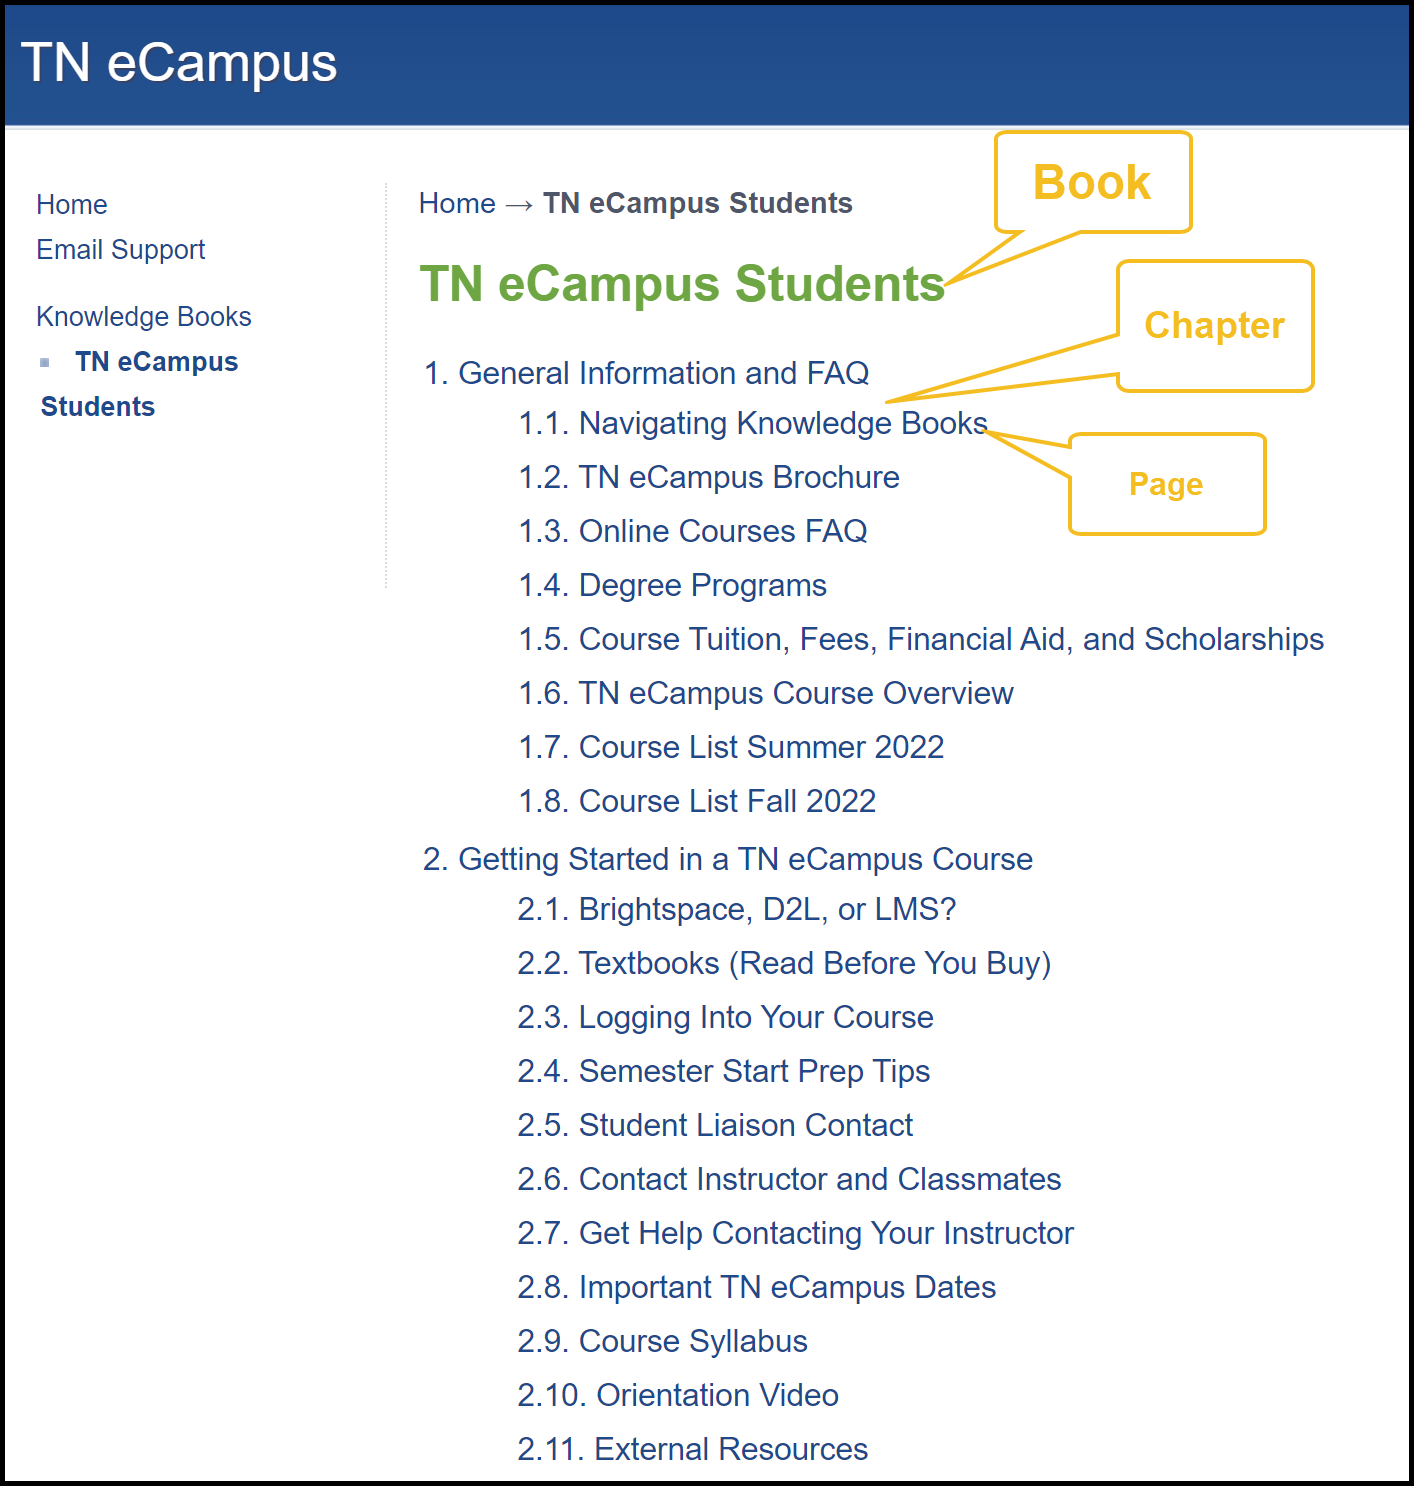 TN eCampus Students in Knowledge Books listing information by book, numbered chapter and page.